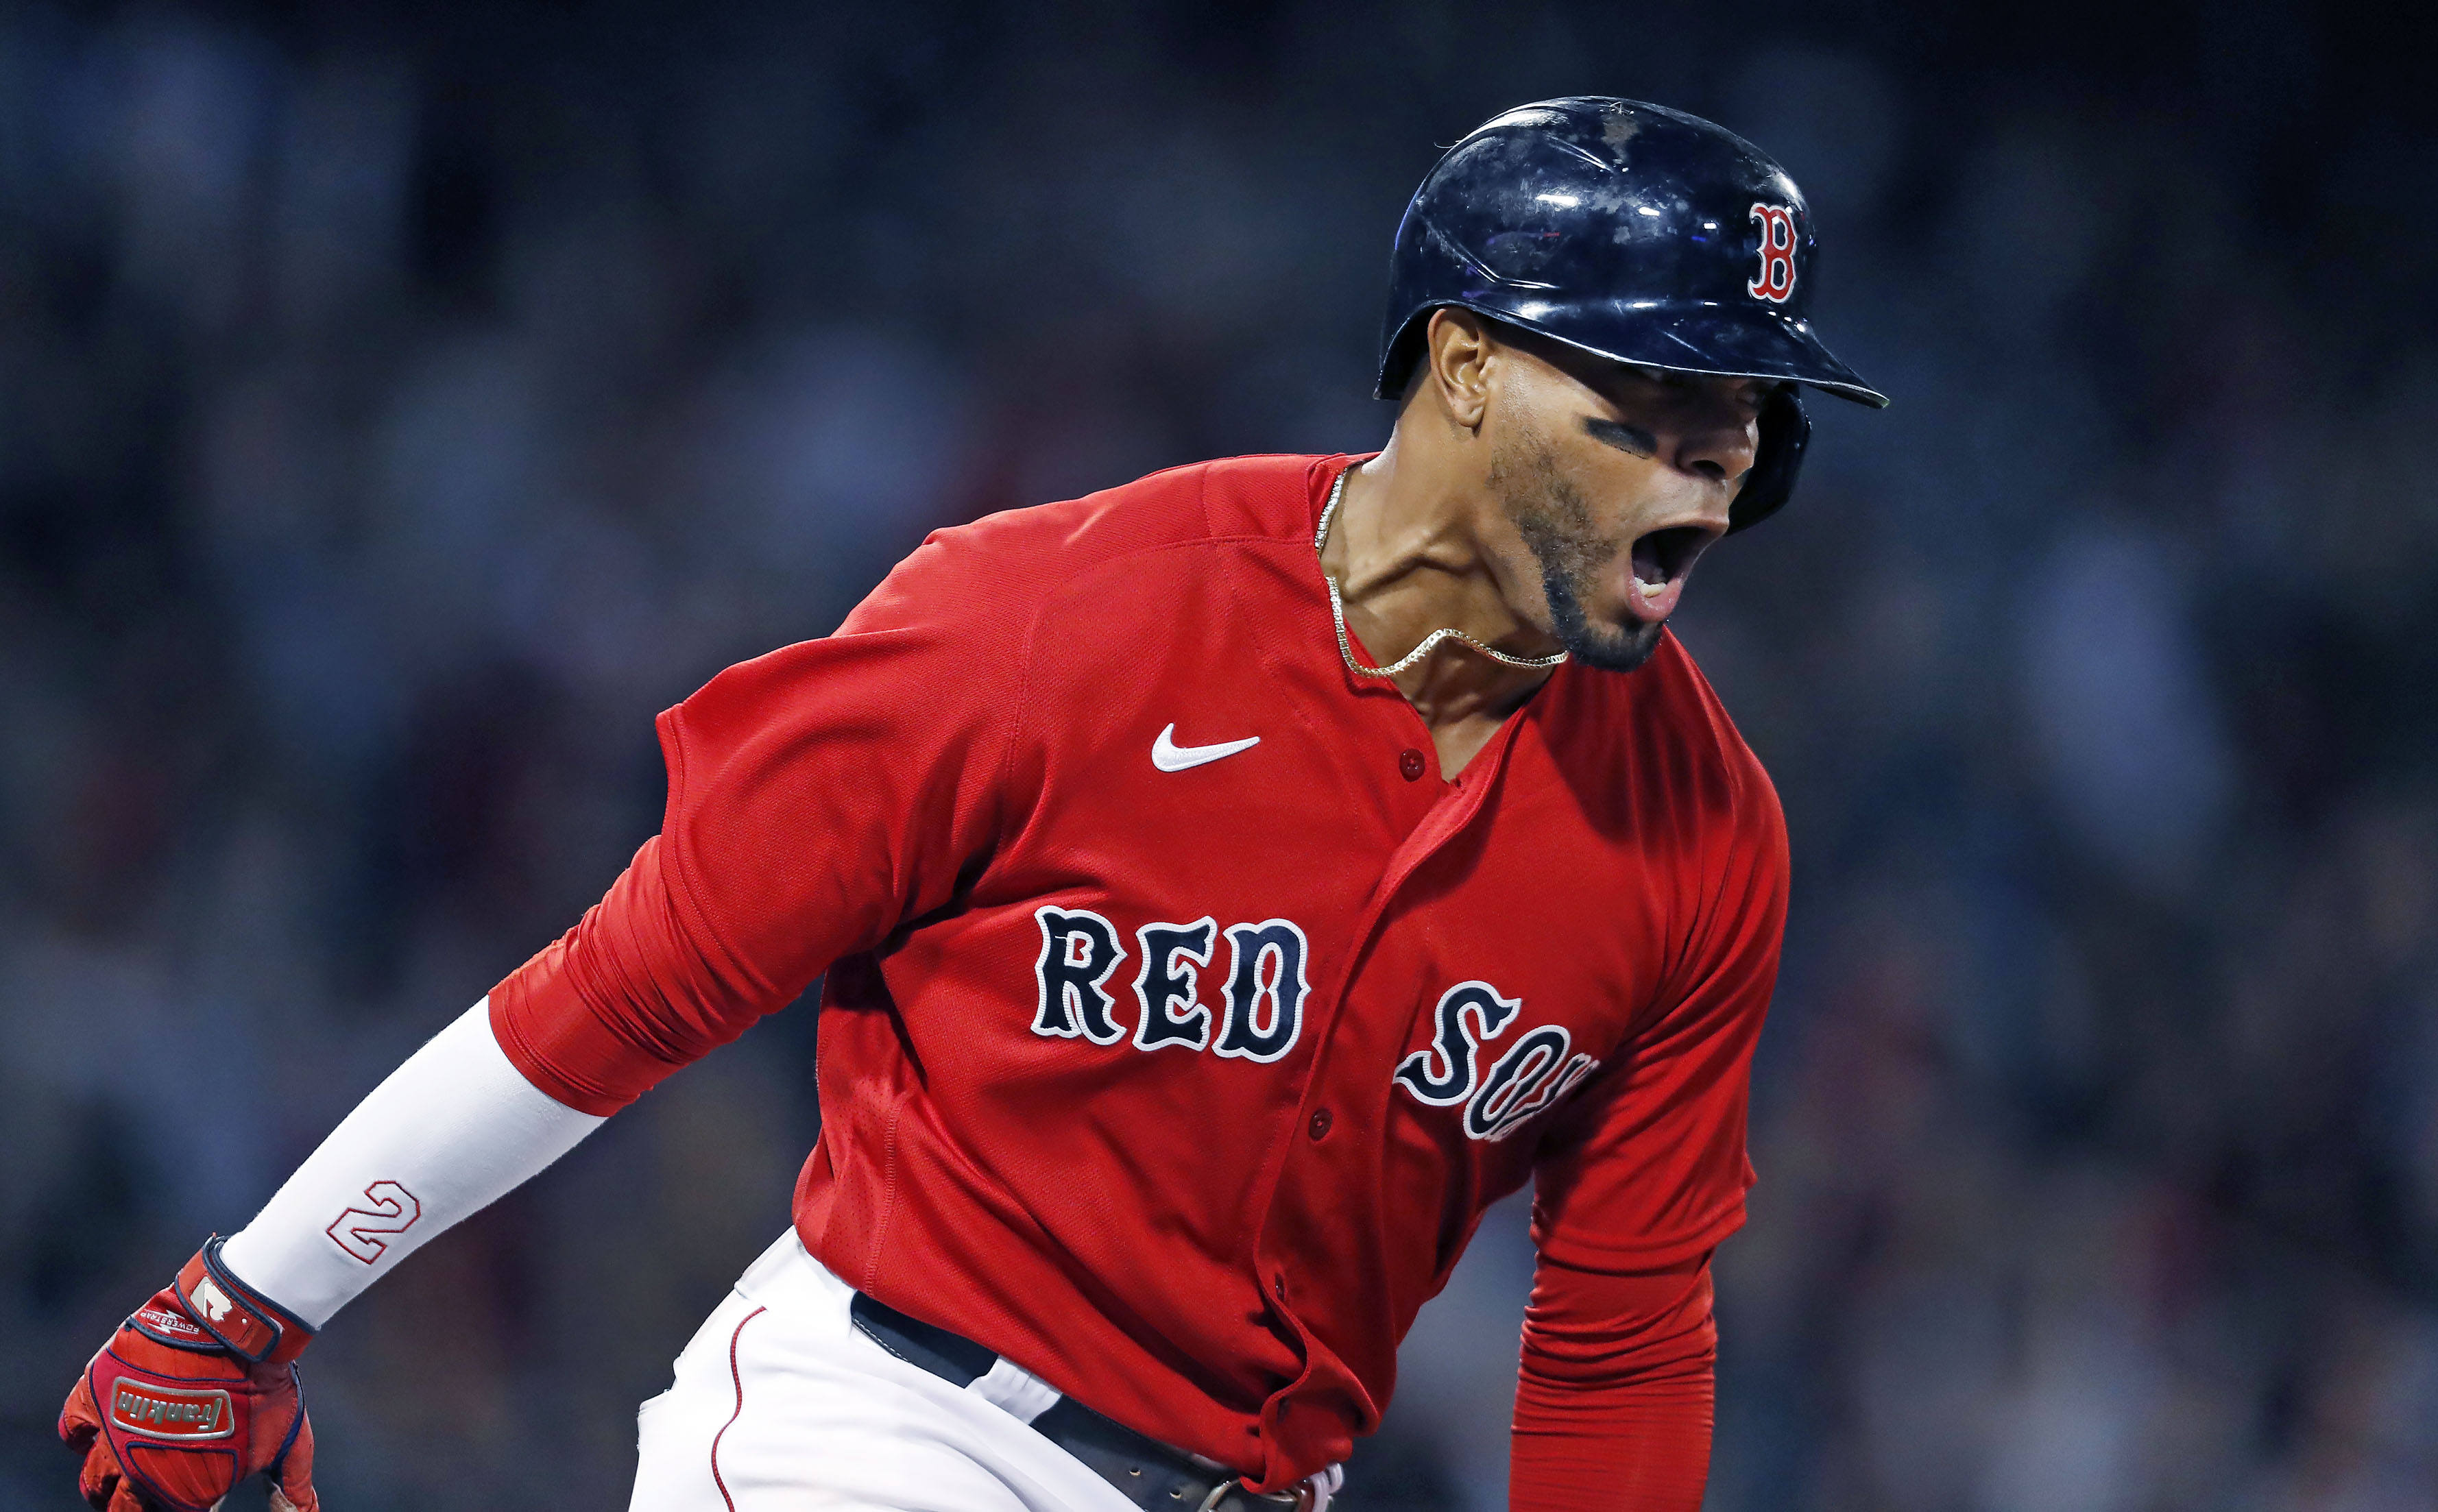 Xander Bogaerts, once again in the middle of everything, showed up